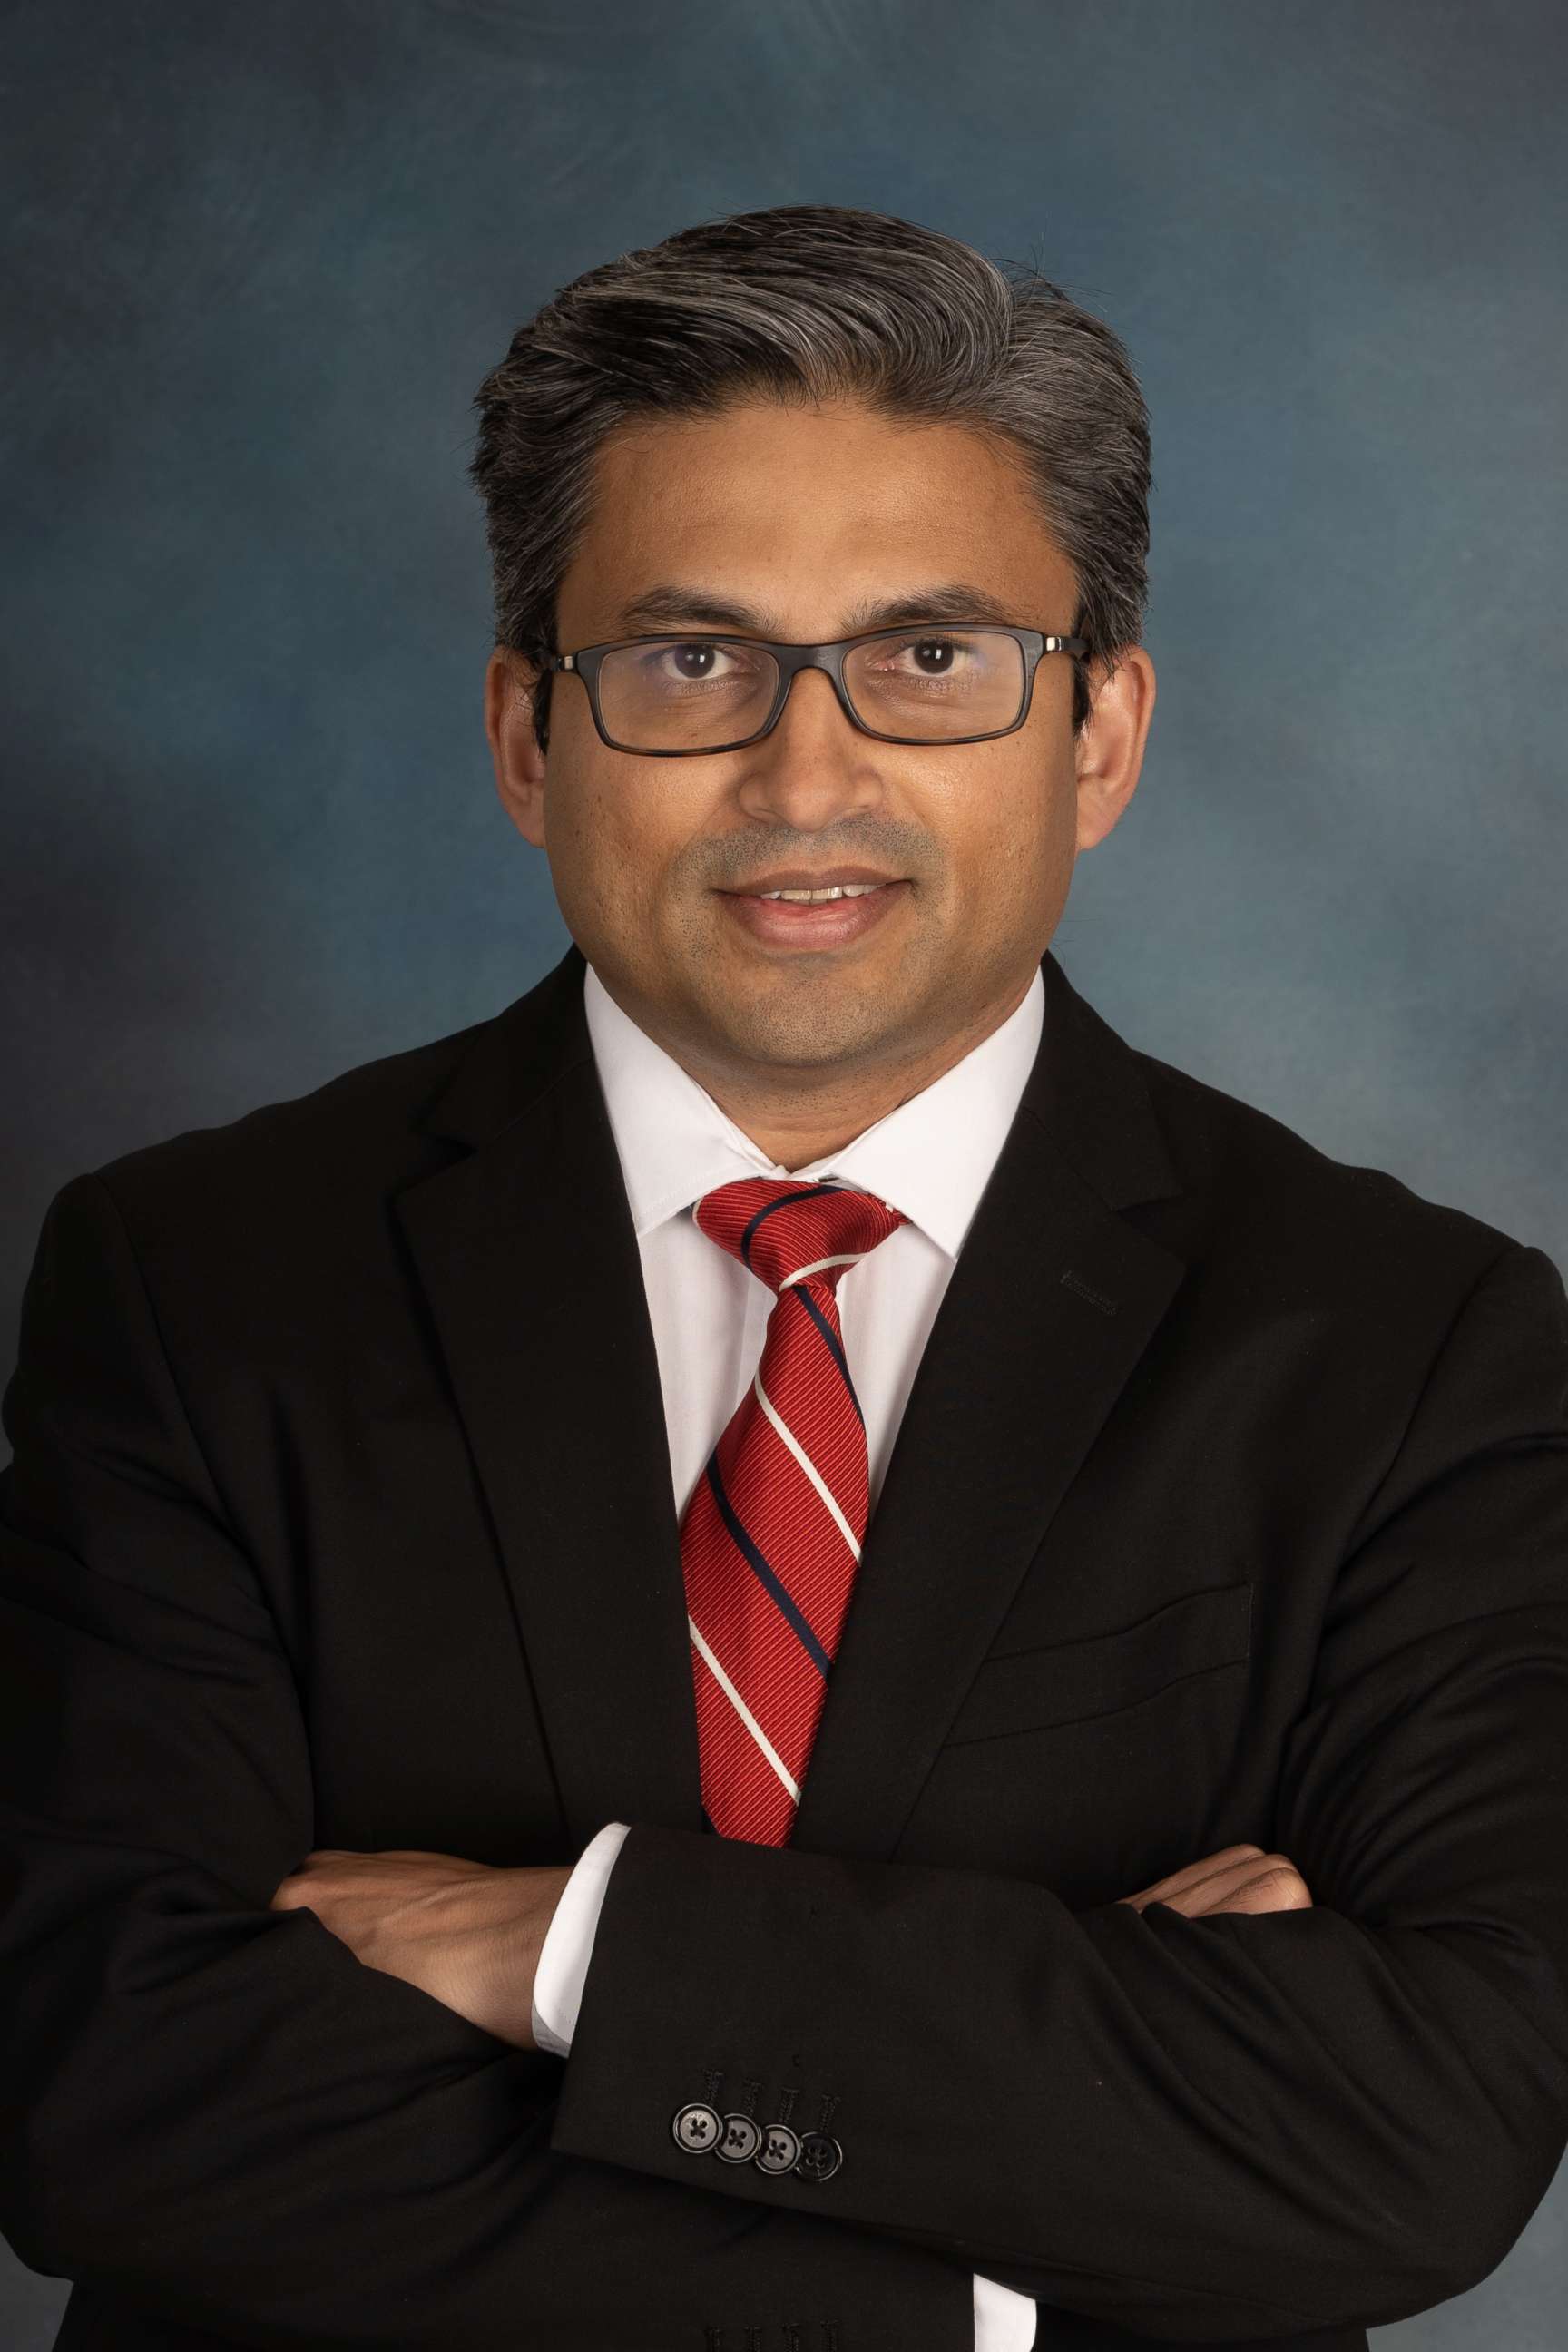 PHOTO: Ram Sanjeev Alur is a doctor of internal medicine in Marion, Illinois and the president of Physicians for American Healthcare Access